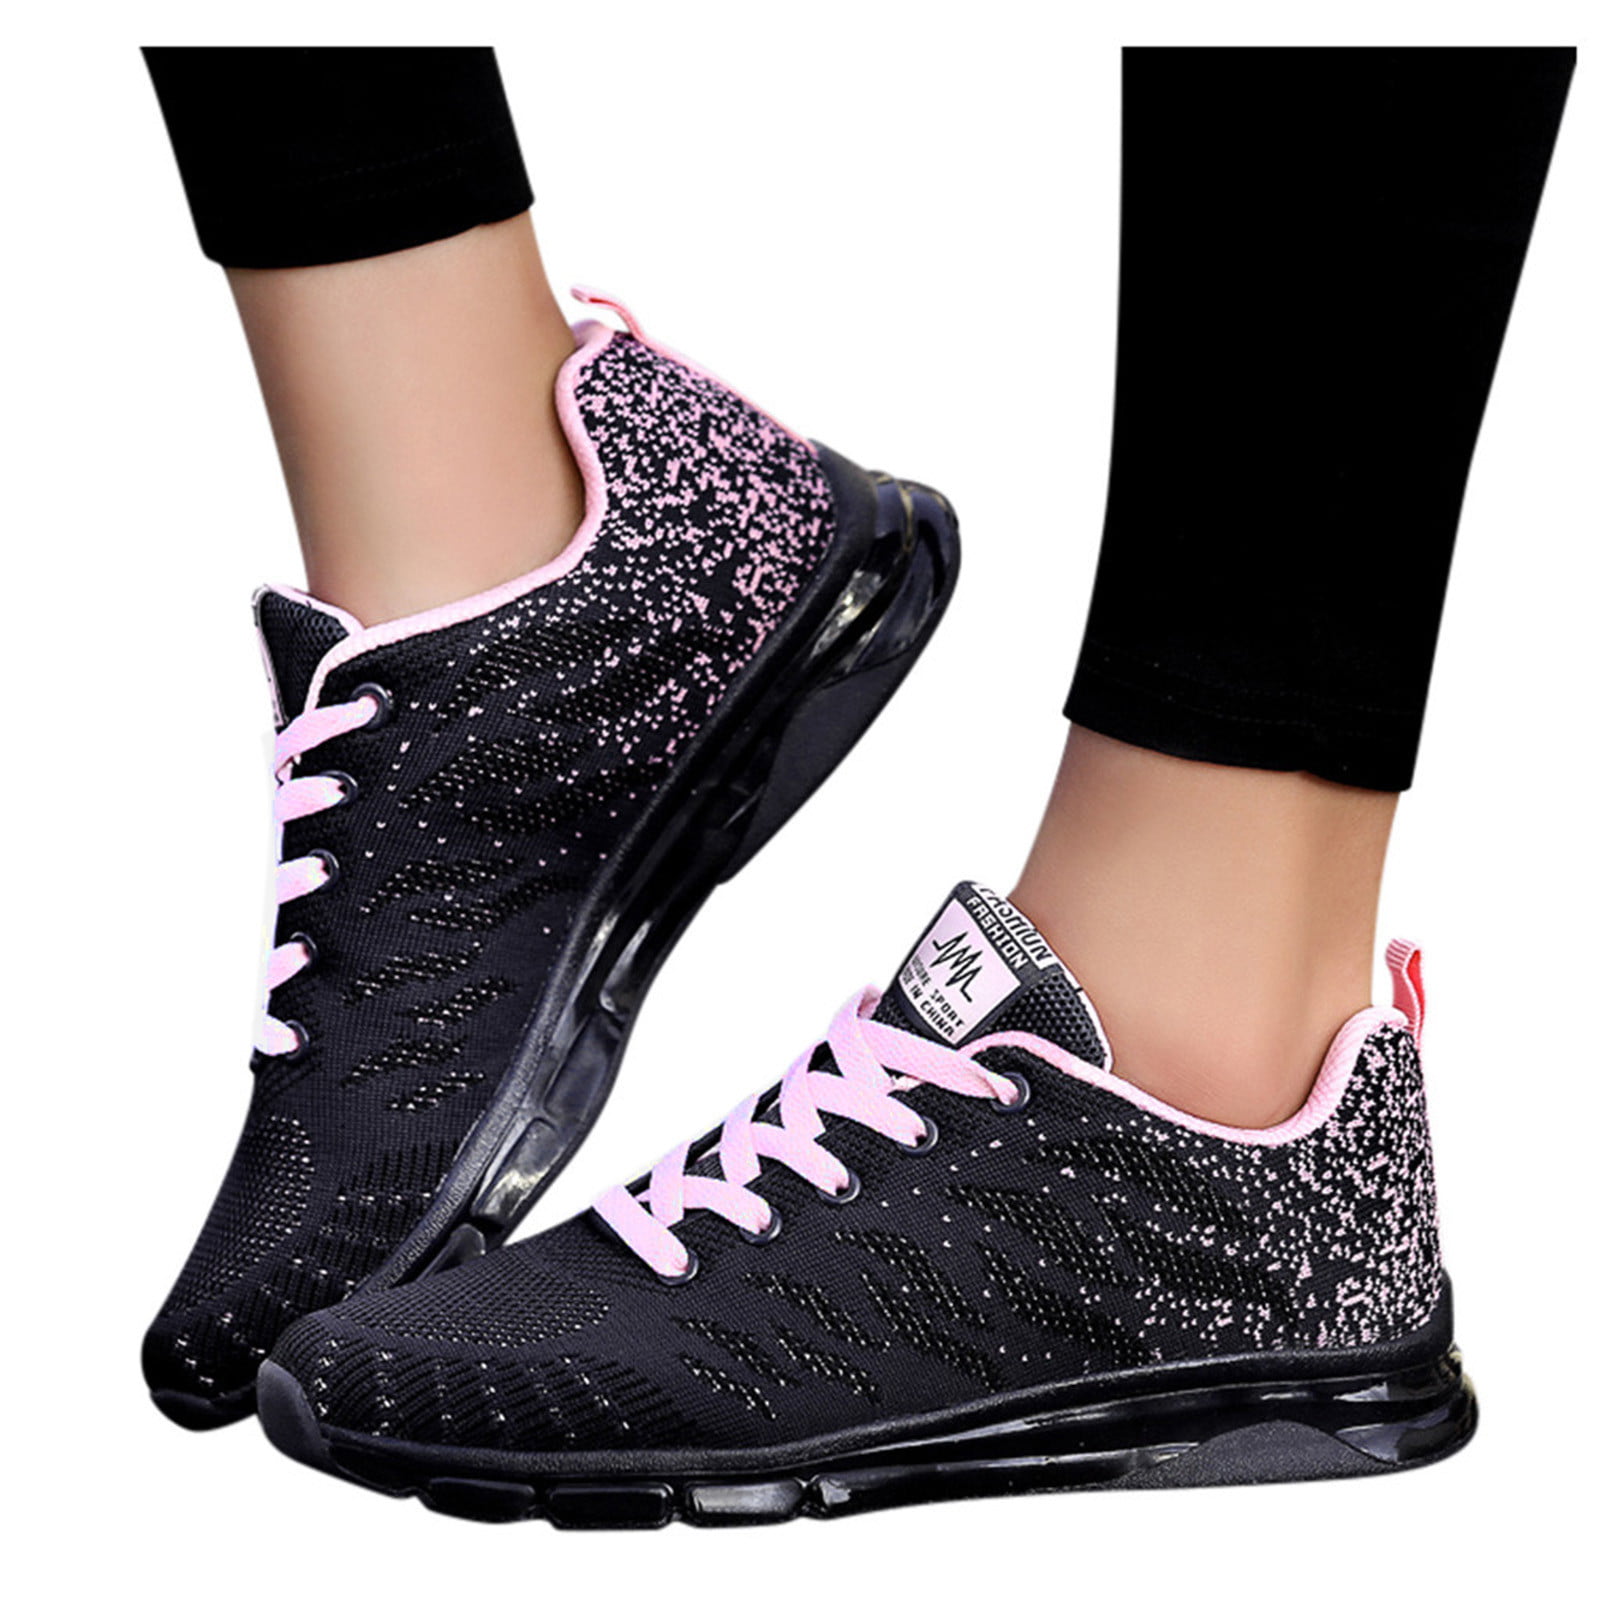 Details about  / Women/'s Sports Non-Slip Running Shoes Outdoor Jogging Sneakers Walking Tennis